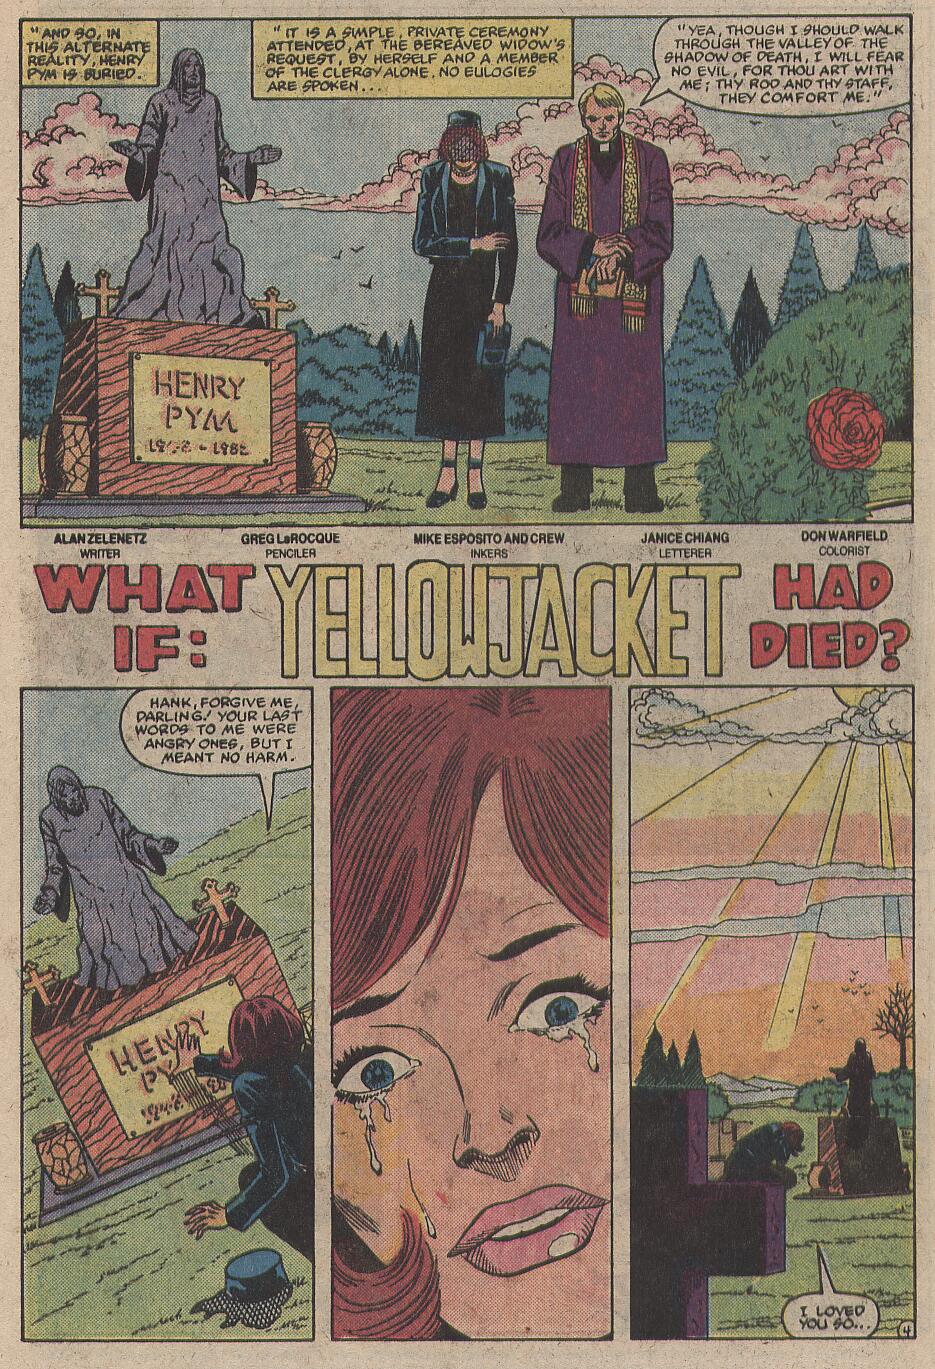 What If? (1977) issue 35 - Elektra had lived - Page 29